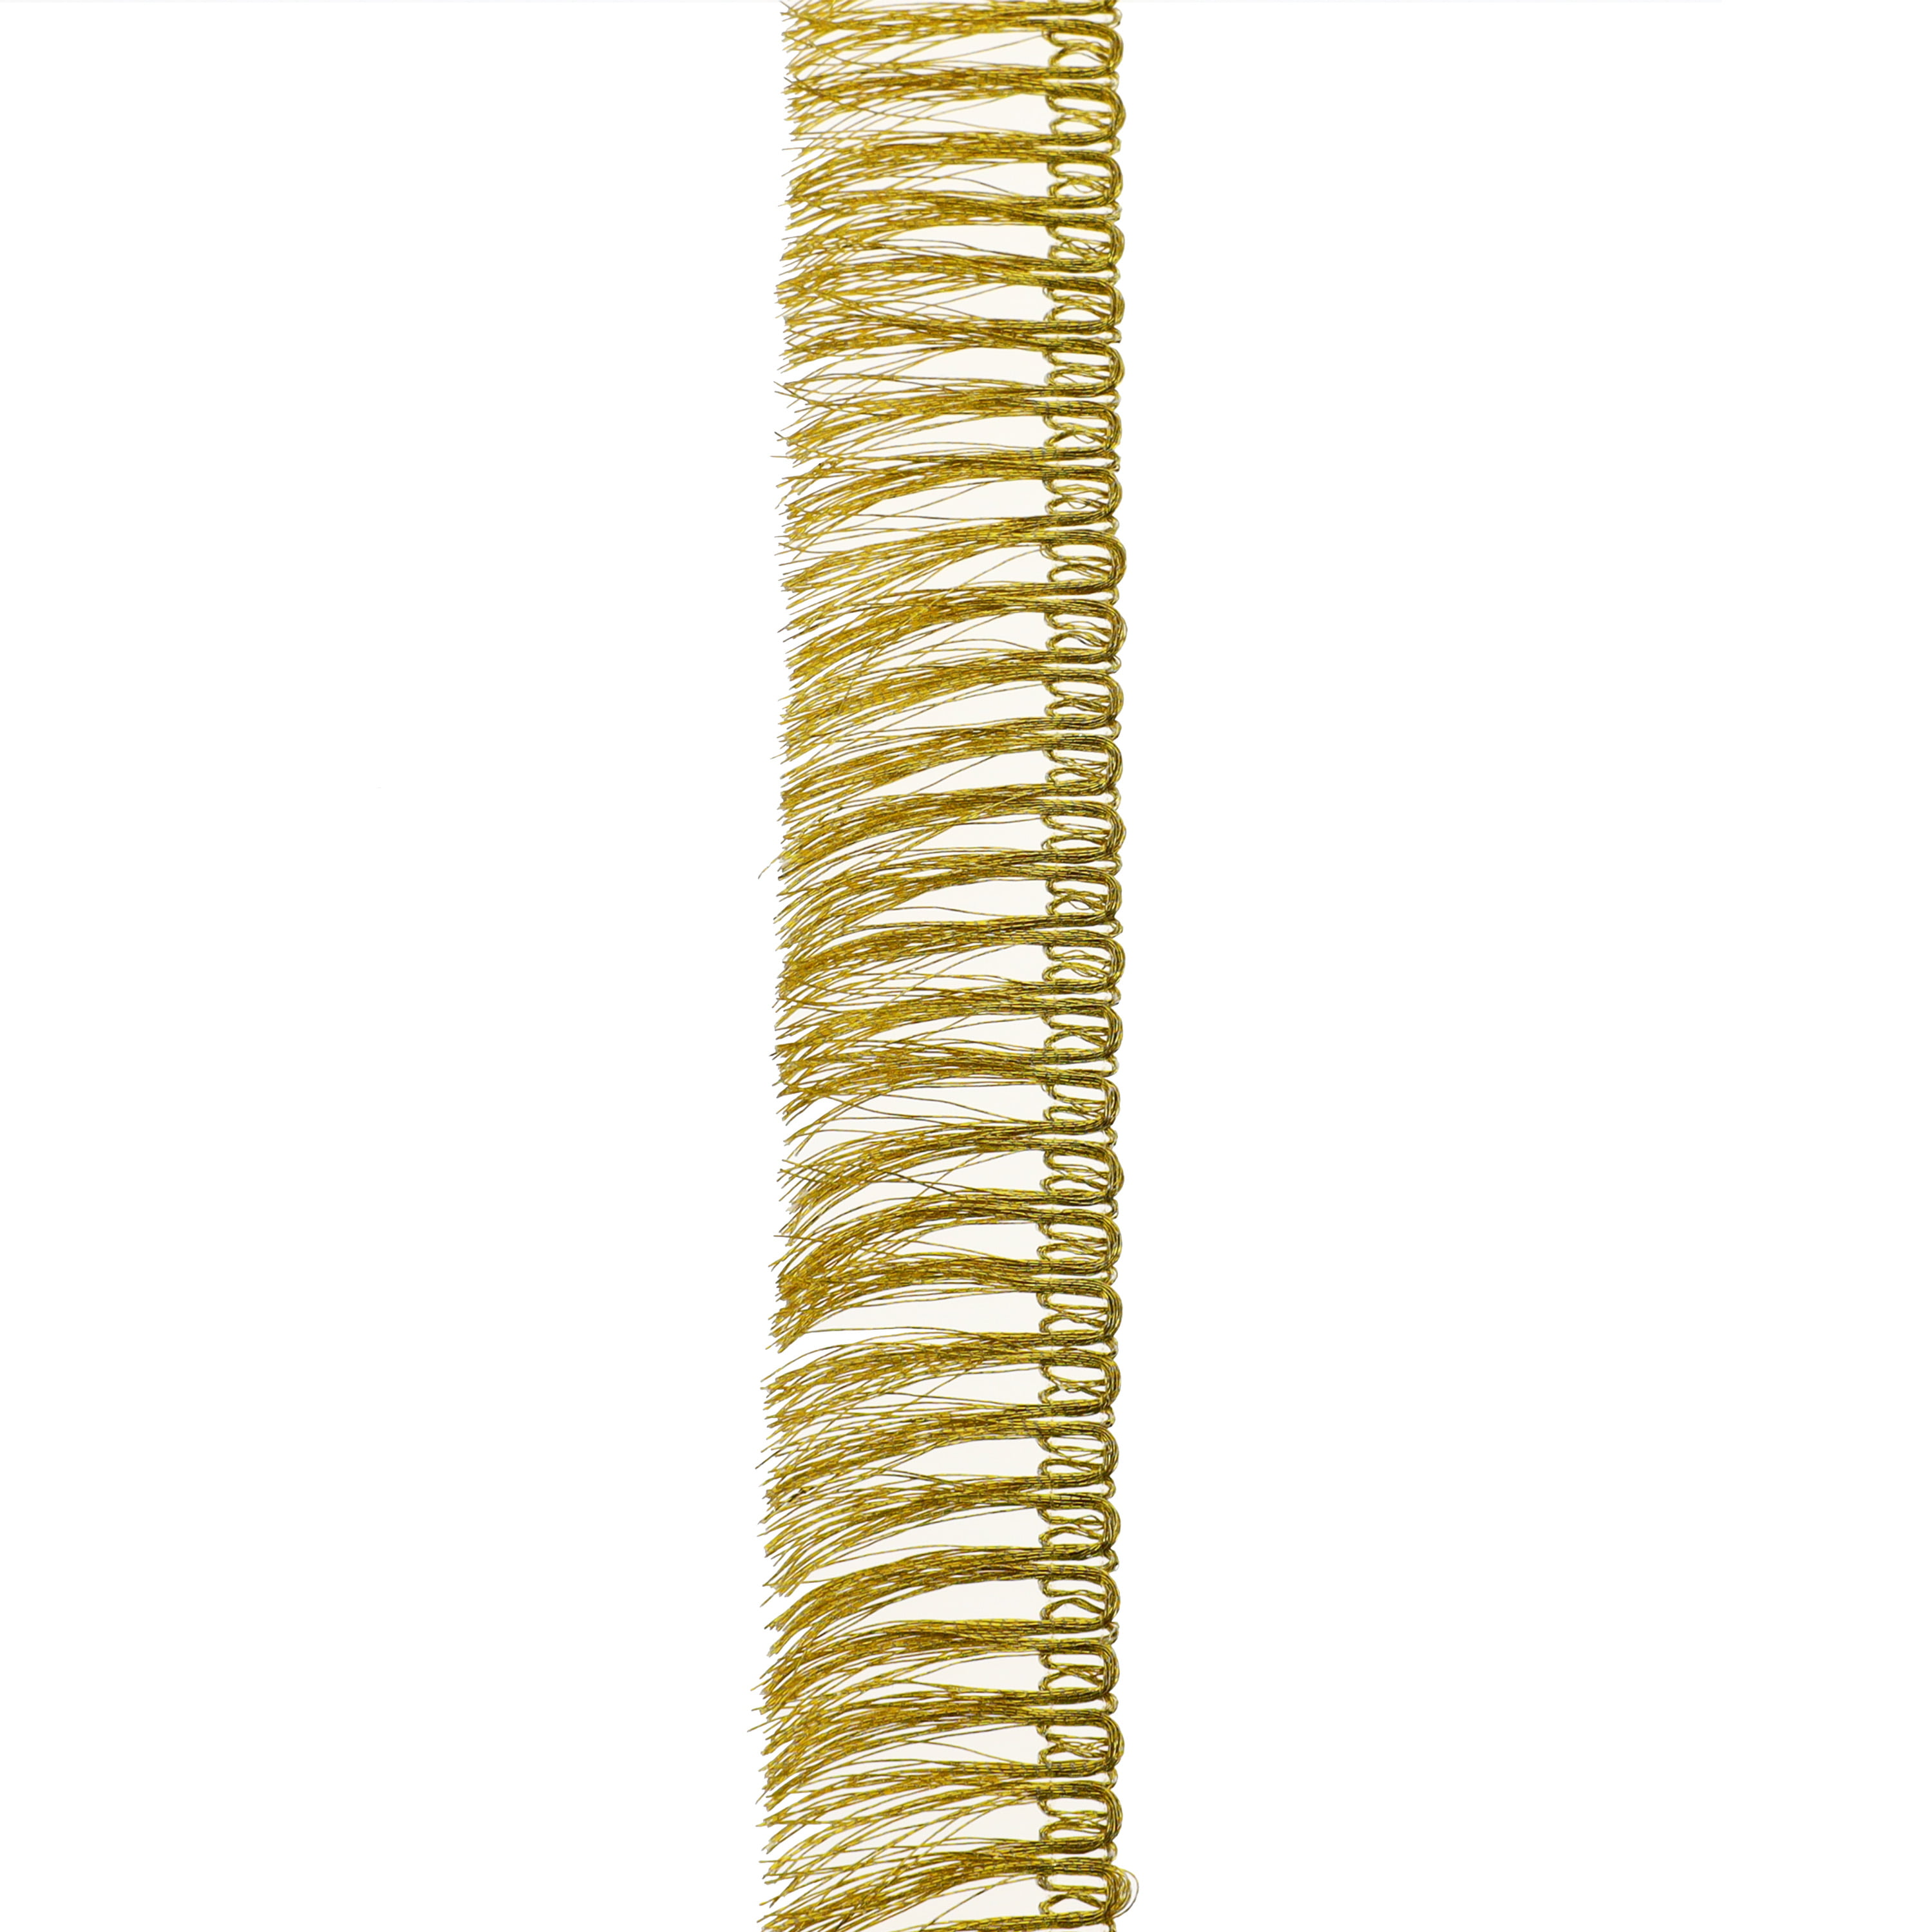 1 Yard Gold Bead Fringe Trim For Haute Couture Handmade Bead Fringe Tassel  Seed Beads Fringe Millinery Crafts Costumes